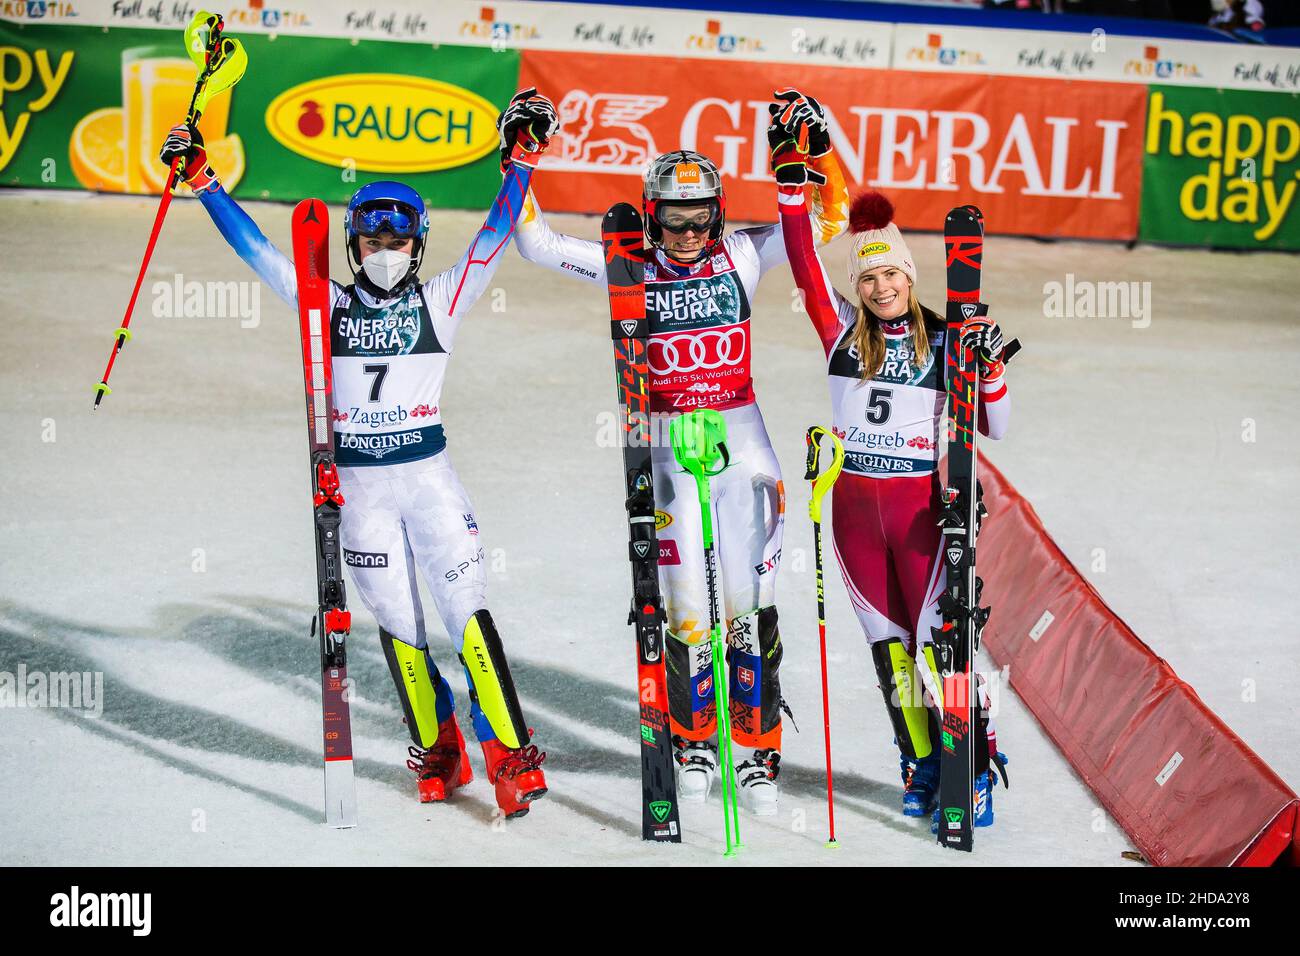 Zagreb, Croatia, 4th January 2022. Mikaela Shiffrin of USA, Petra Vlhova of Slovakia and Katharina Liensberger of Austria celebrate at the end of the race during the Audi Fis Ski World Cup Snow Queen Trophy - Women's Slalom in Zagreb. Januray 04, 2022. Credit: Nikola Krstic/Alamy Stock Photo